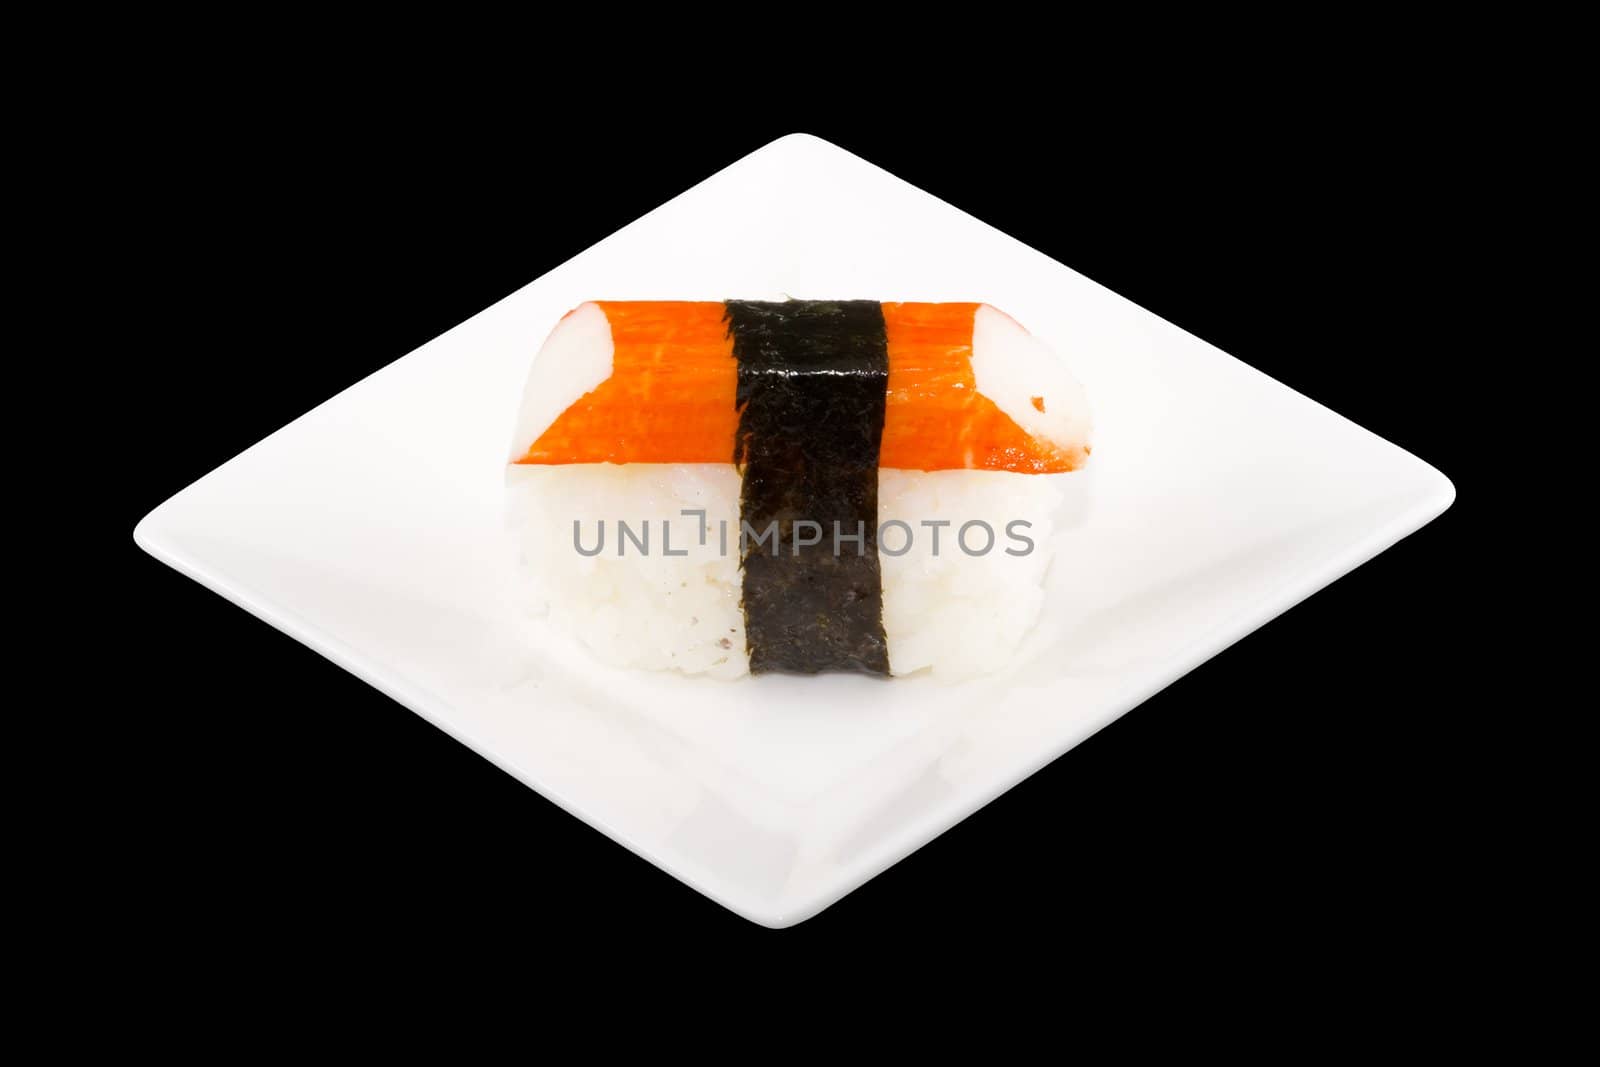 a square white plate with a piece of sushi